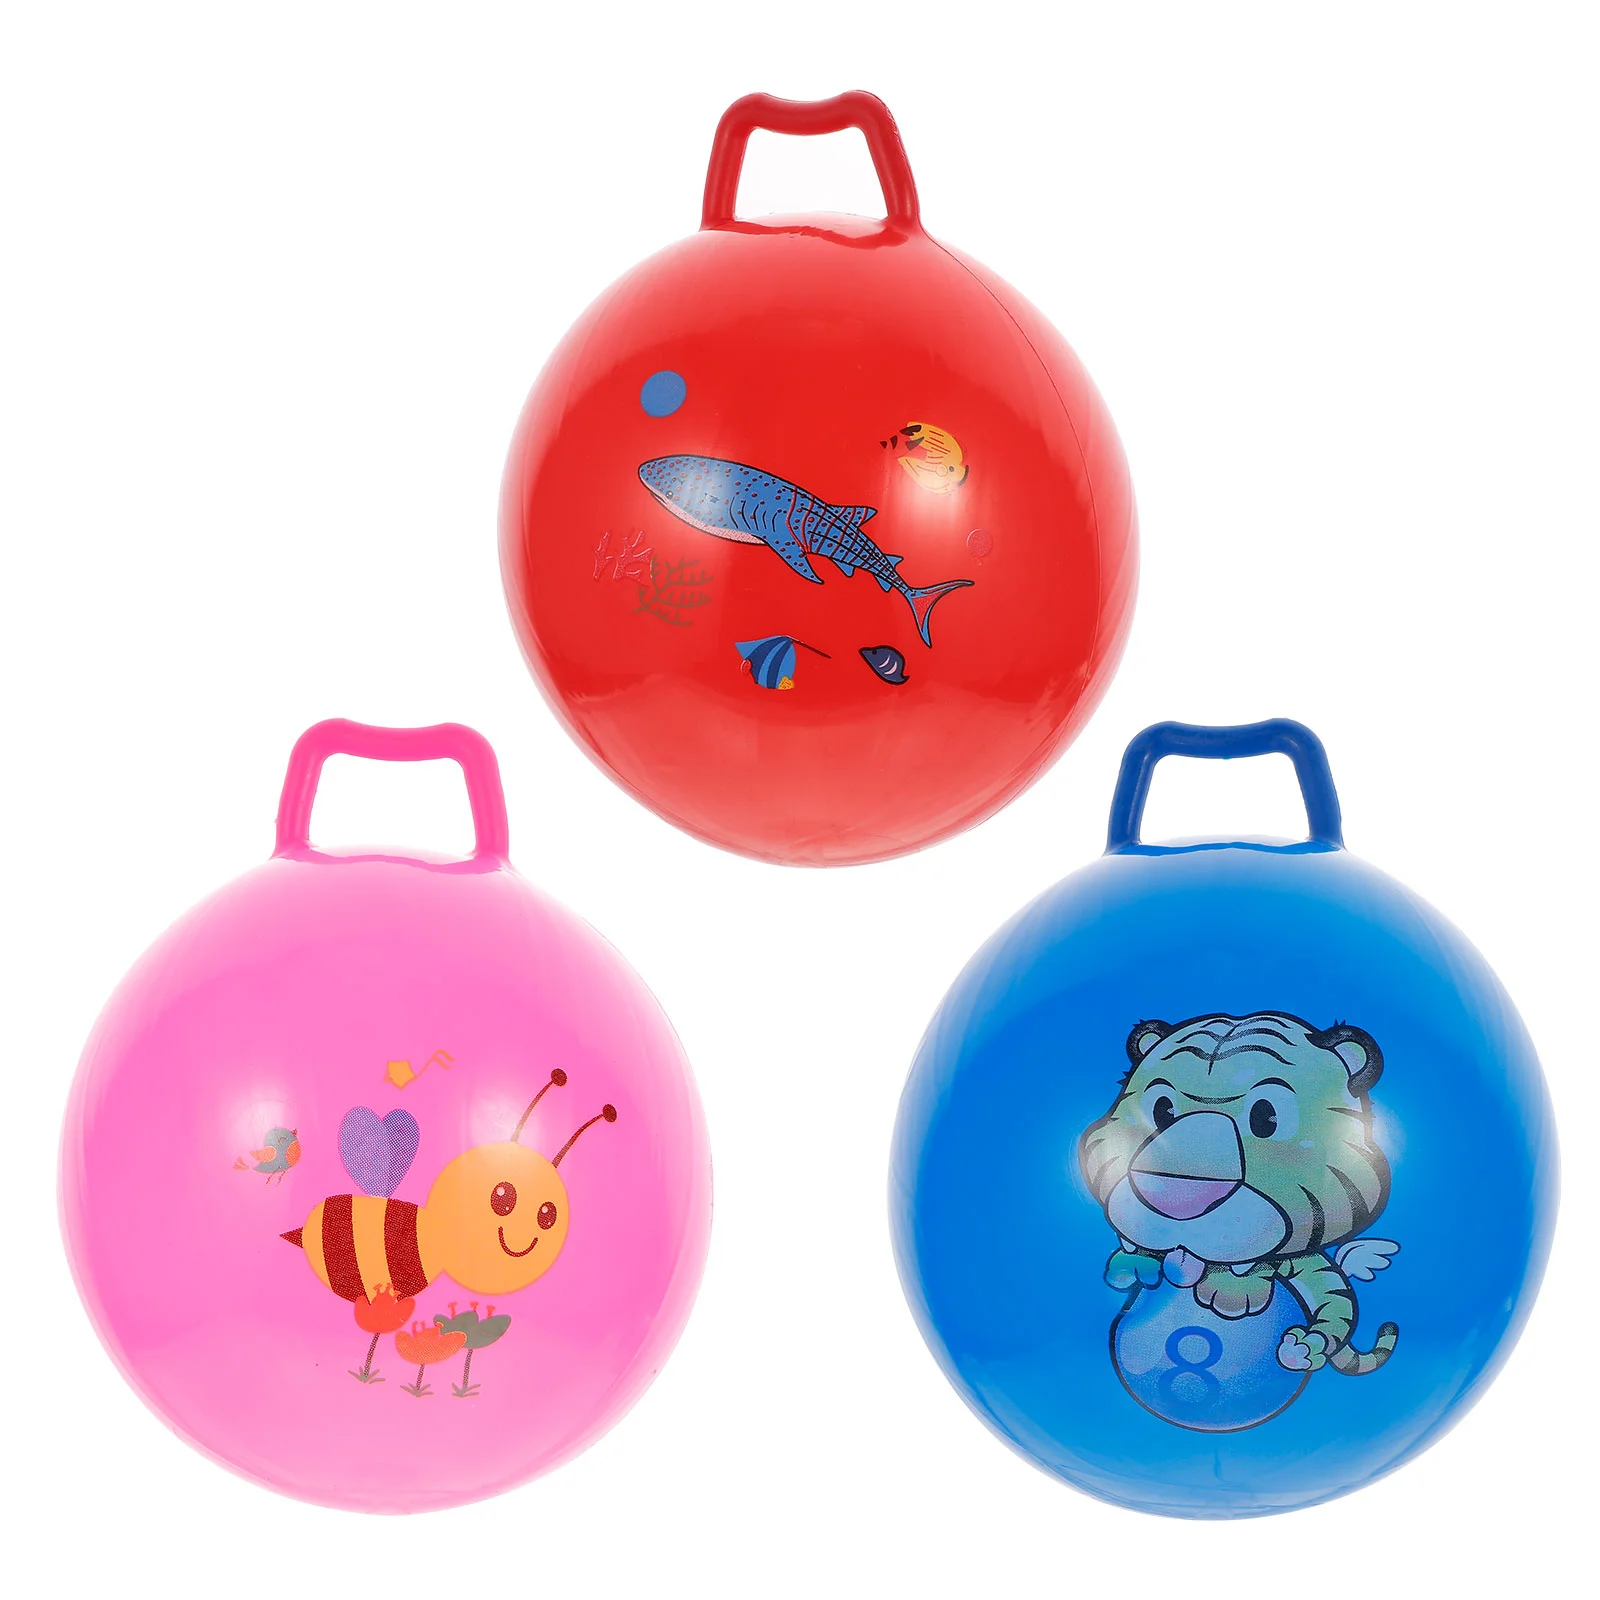 Hopper Kids Inflatabledodgeball Balls Sports Jumping Space Toddler Bounce Favors Party Play Playing Handball Bouncy Playground children s outdoor sports toys magic ufo ball beach garden throwing disc ball novelty deformation toys parent child party game